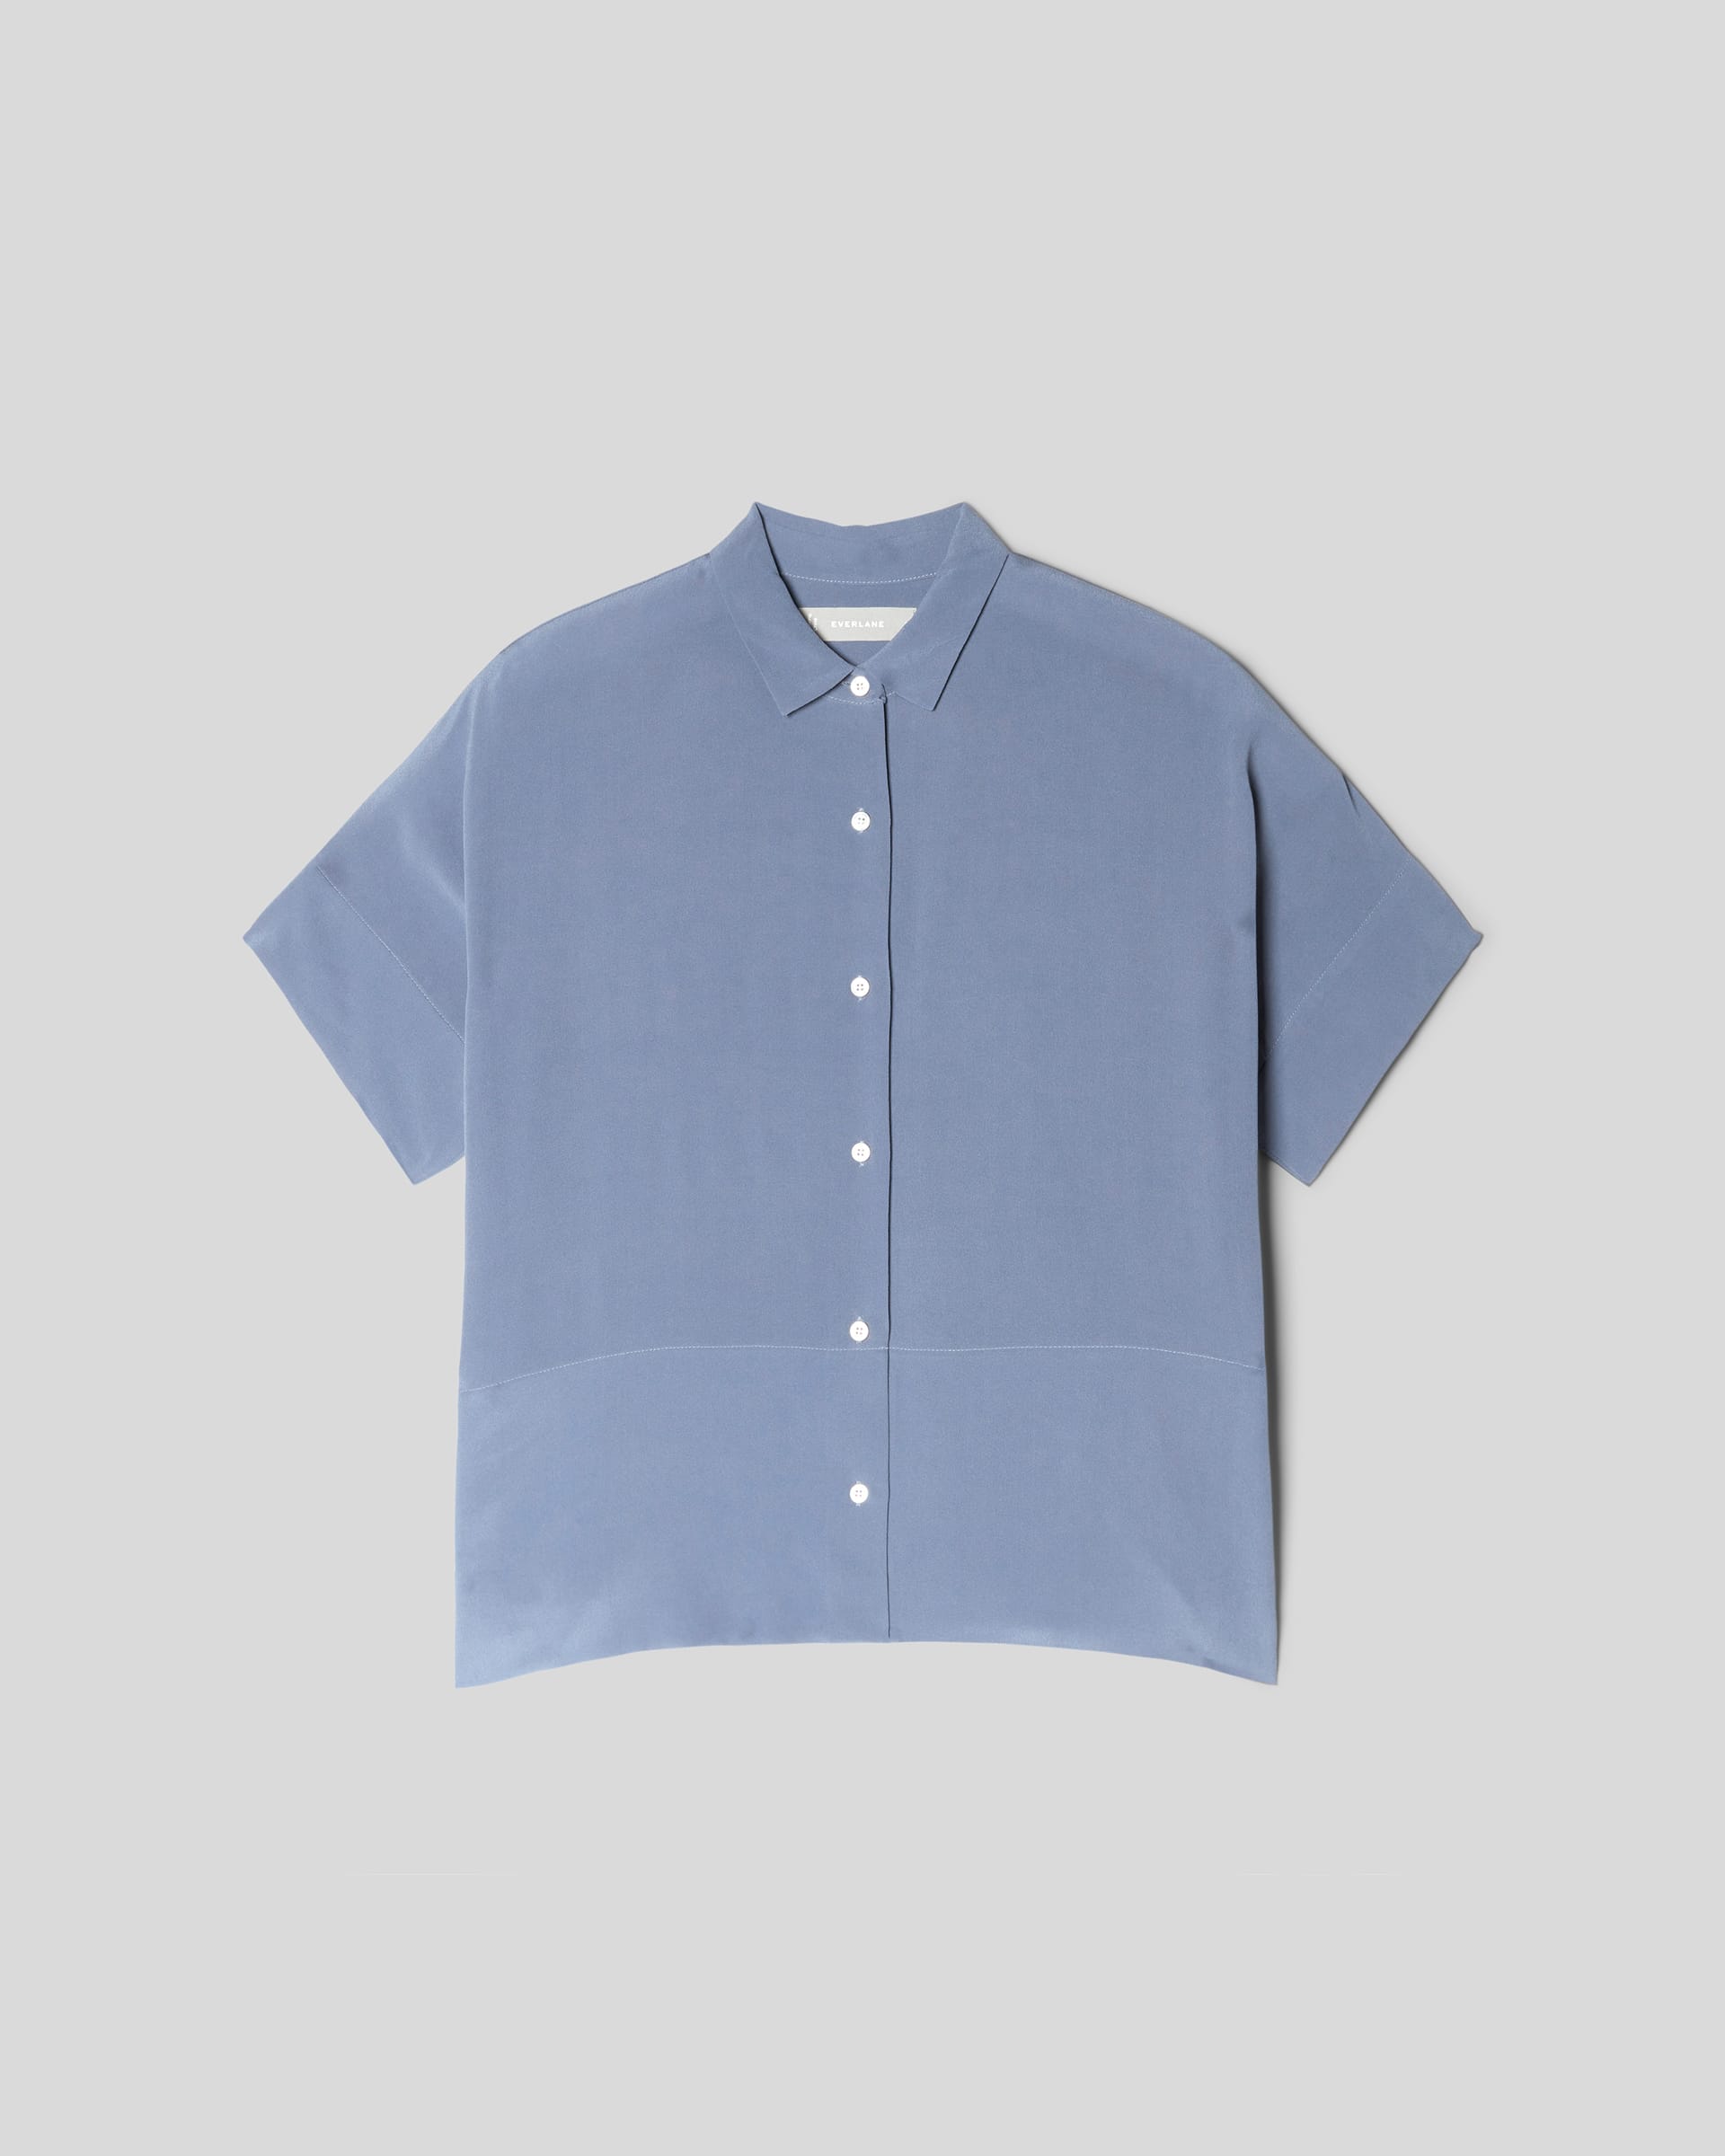 The Clean Silk Short-Sleeve Square Shirt French Blue – Everlane